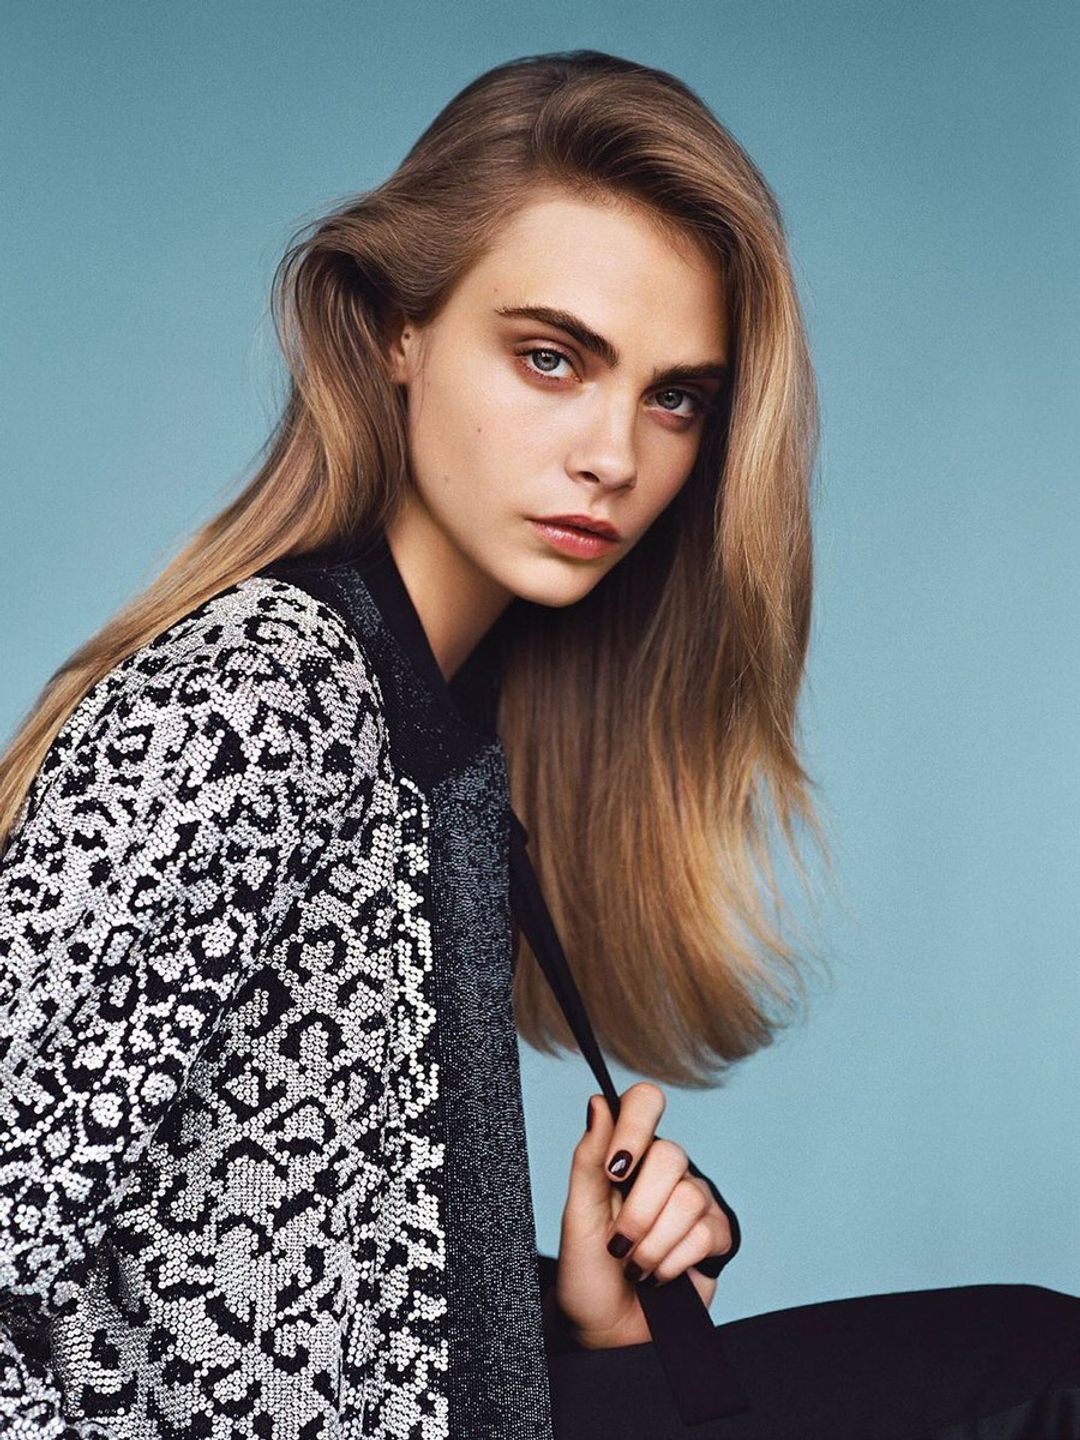 Cara Delevingne where is she now